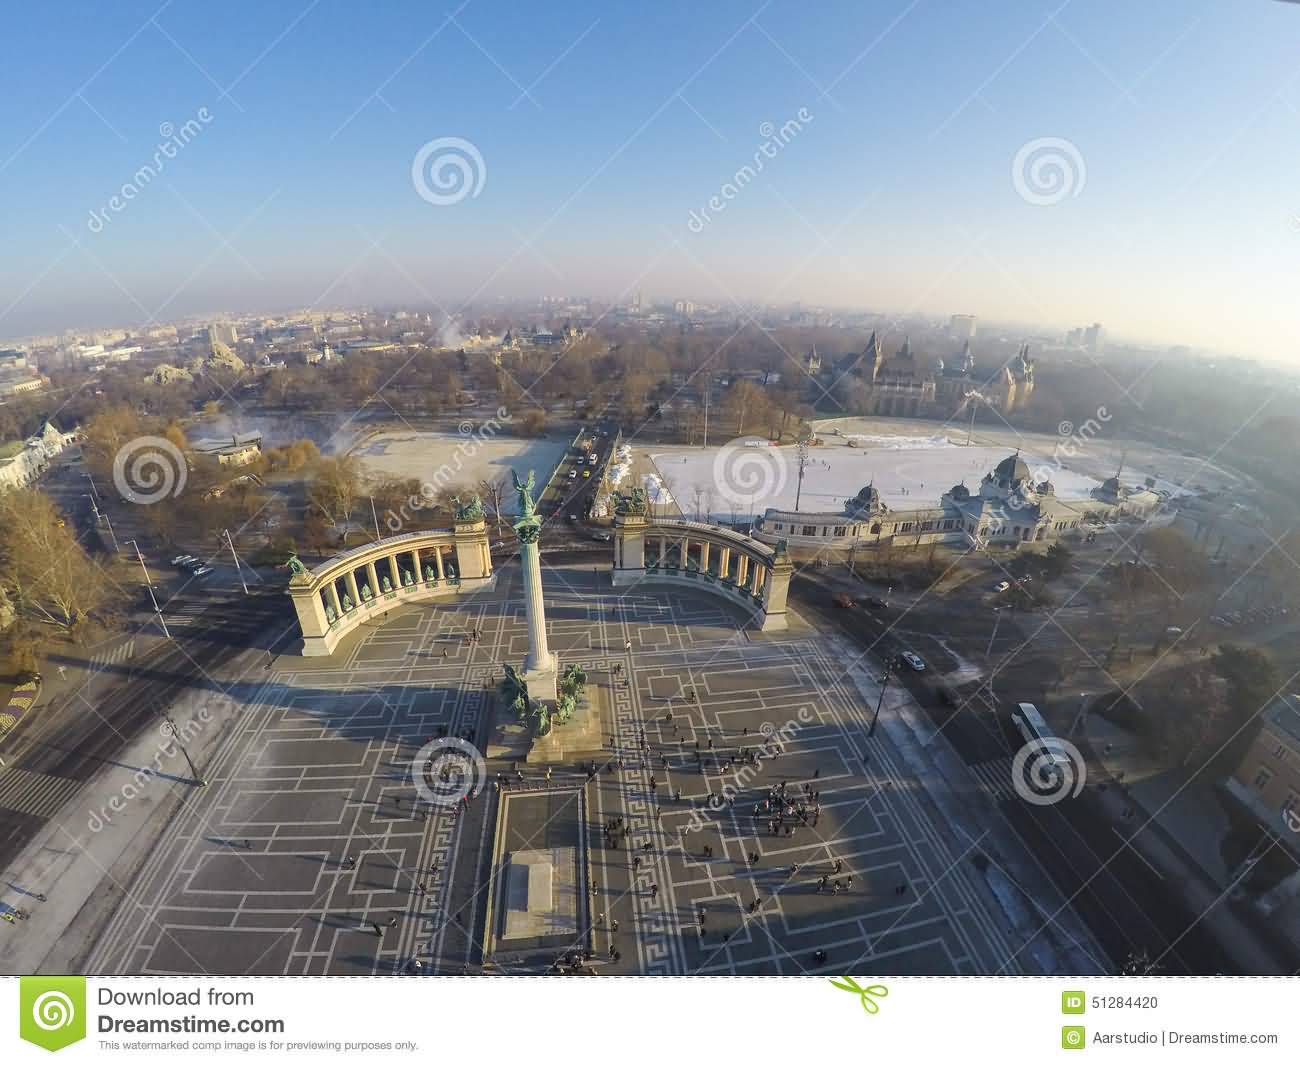 Heroes Square View From Above